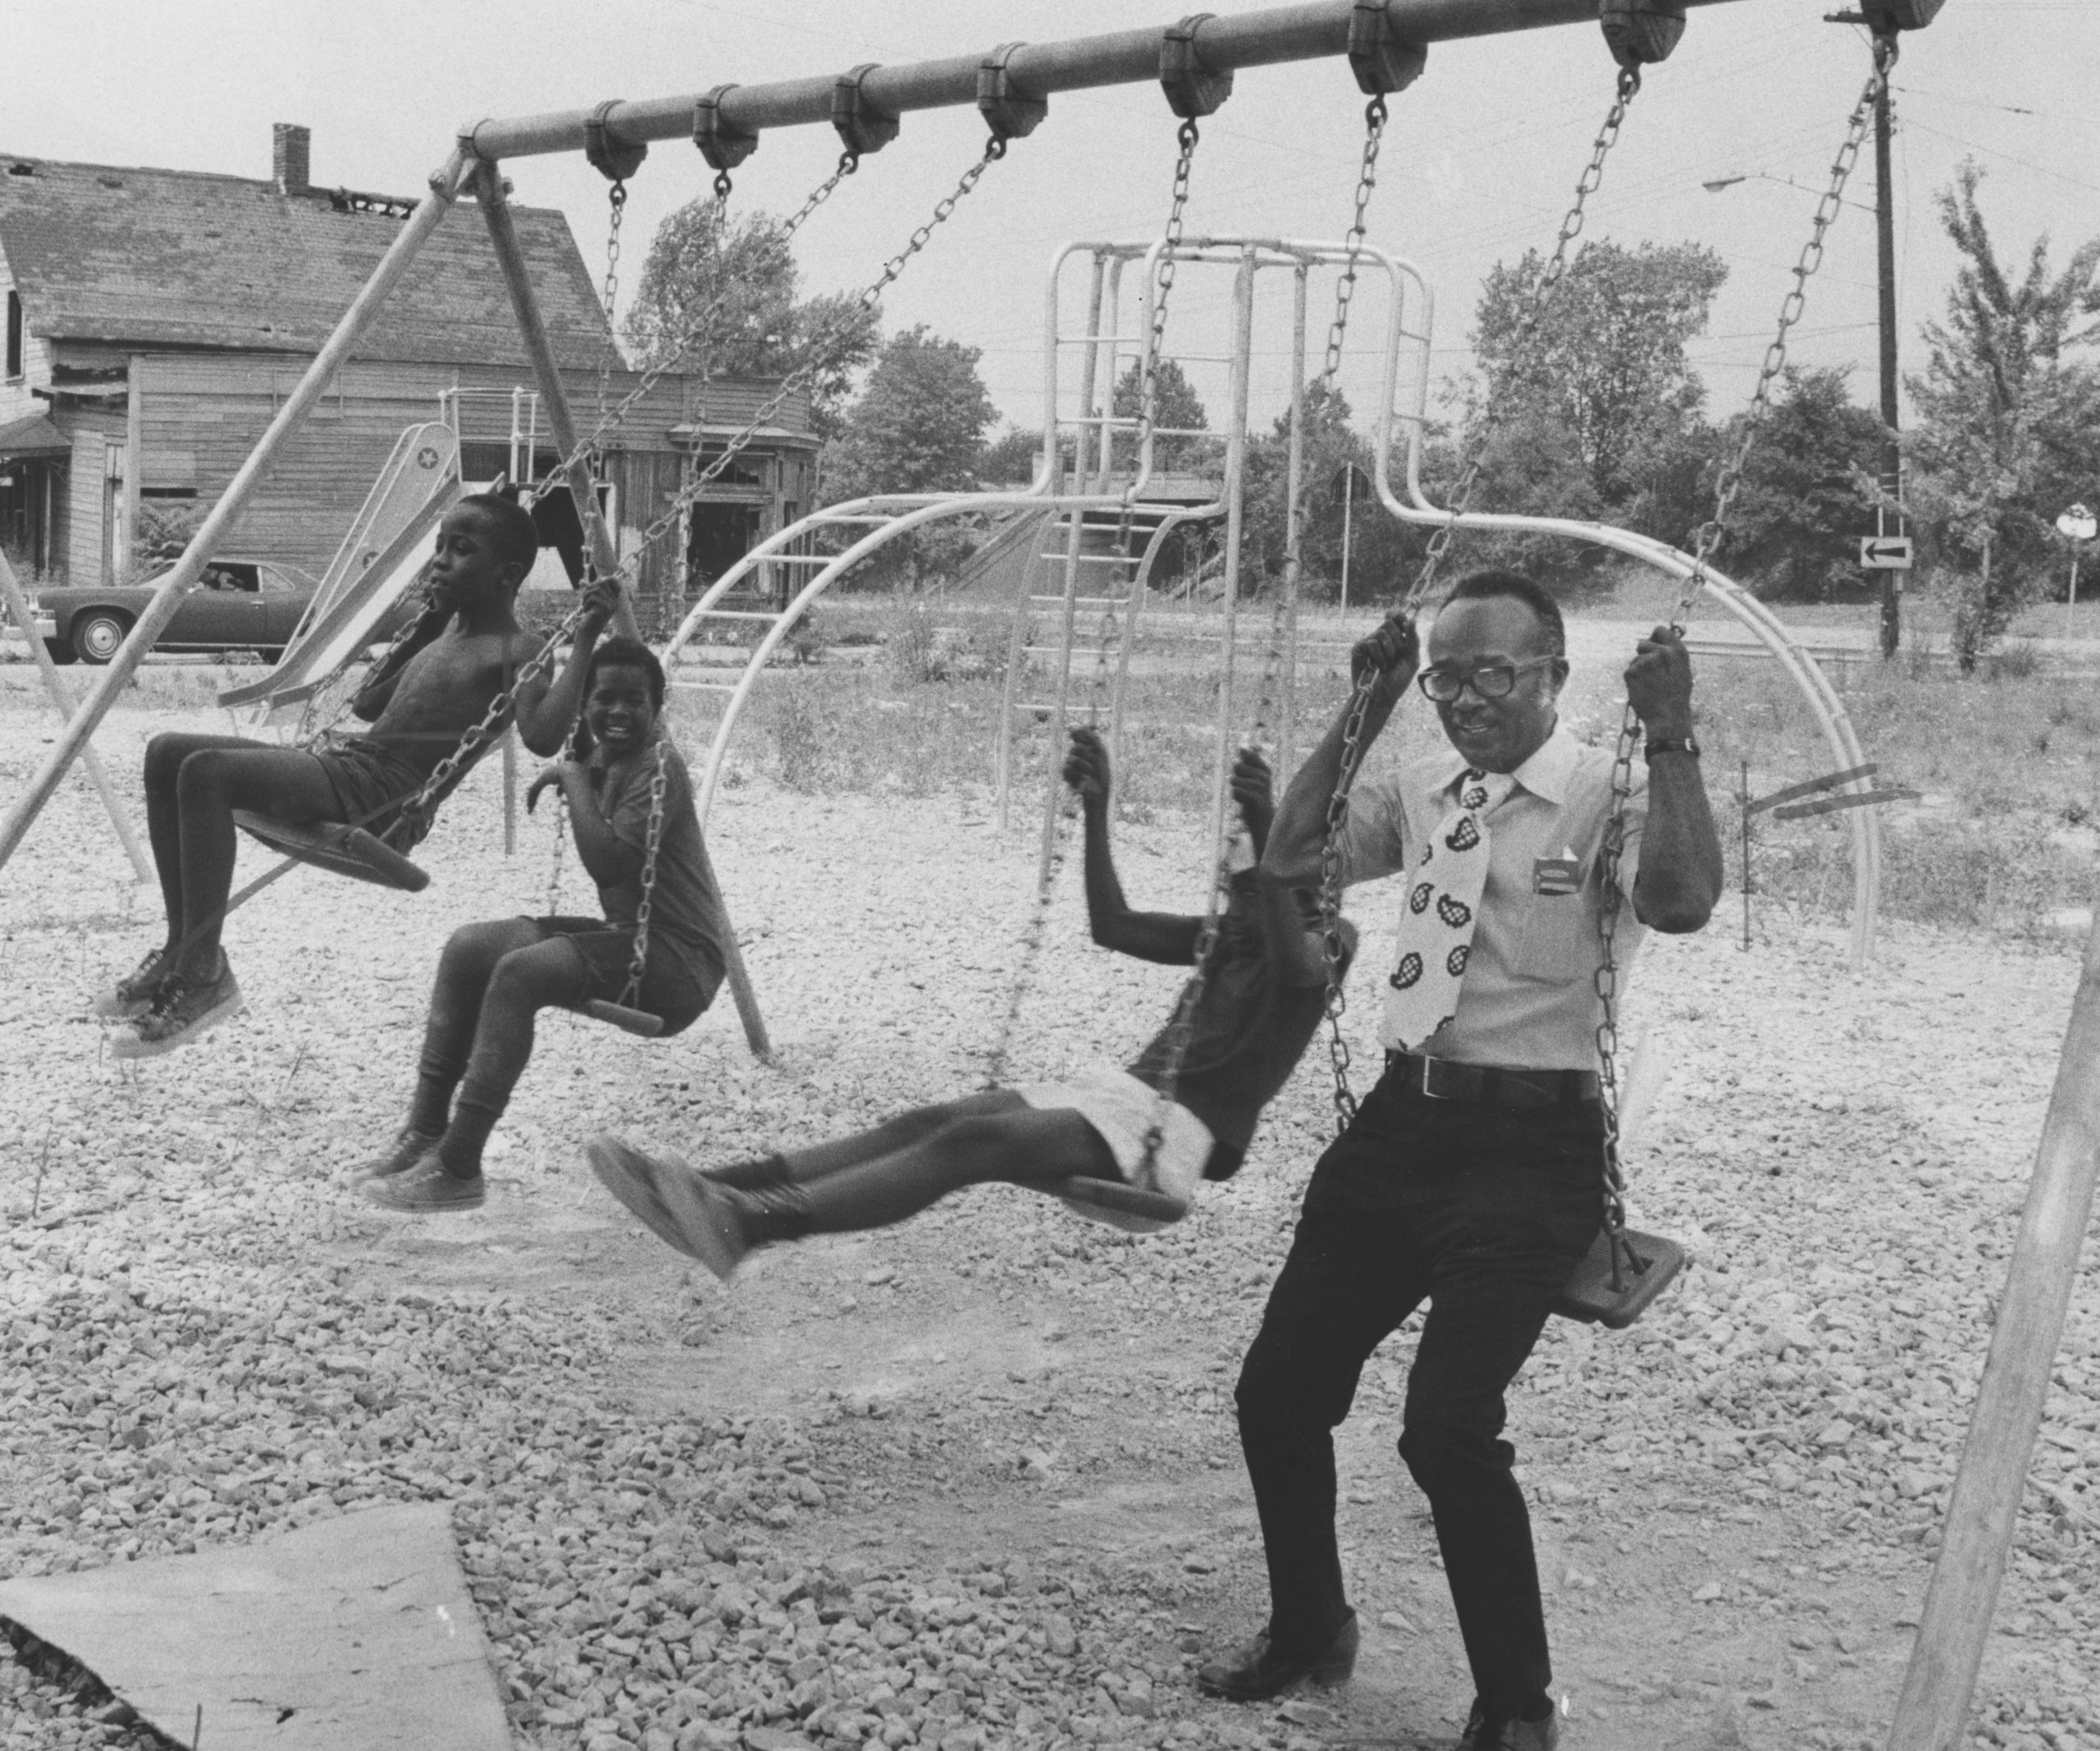 Black and white photograph of two boys and one man playing on a swing set